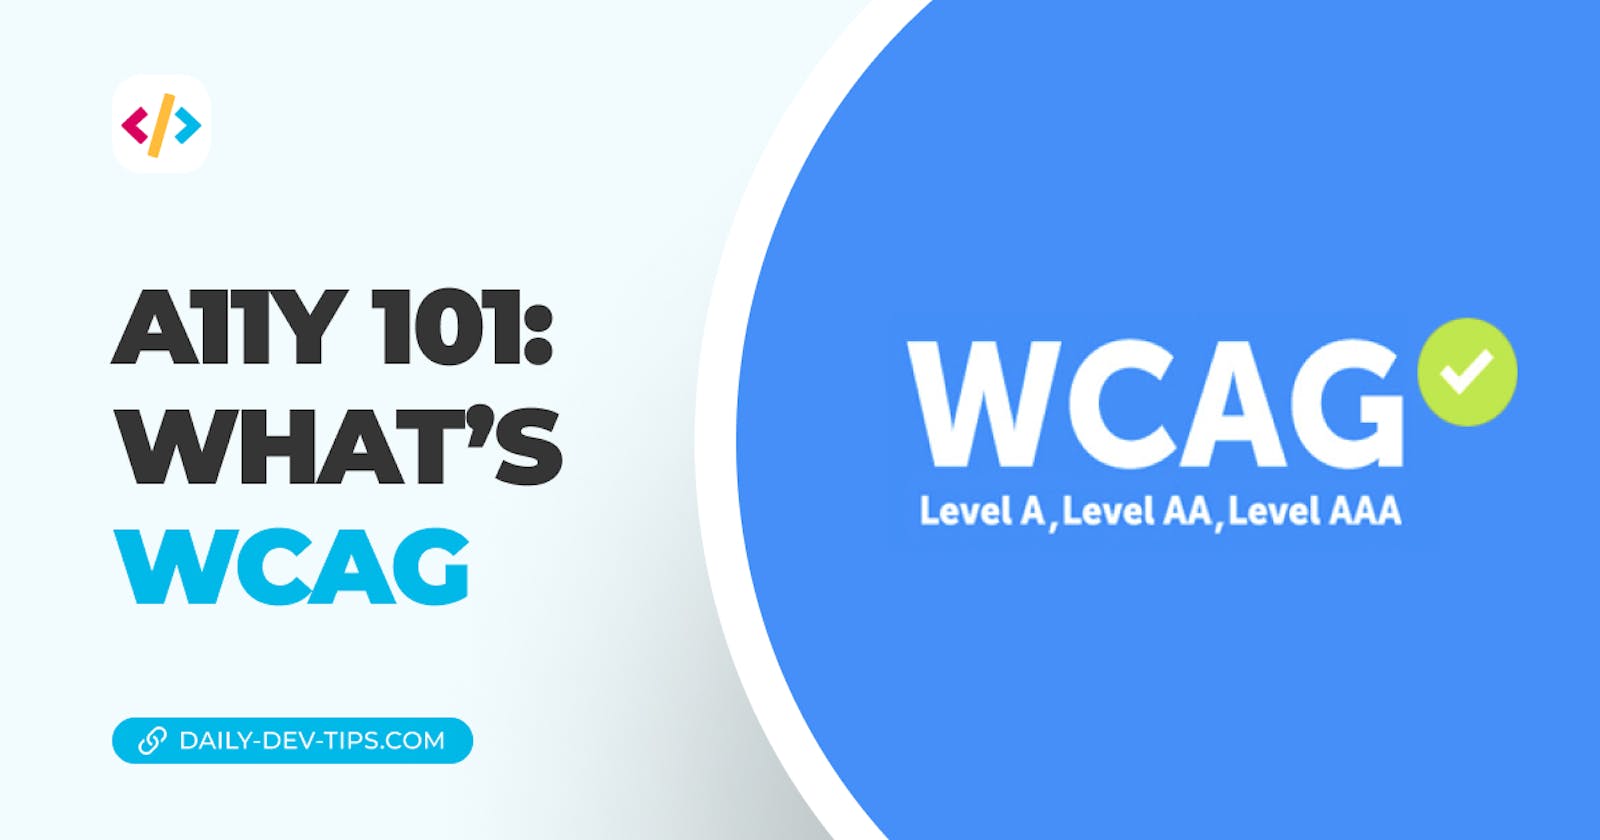 A11Y 101: What's WCAG